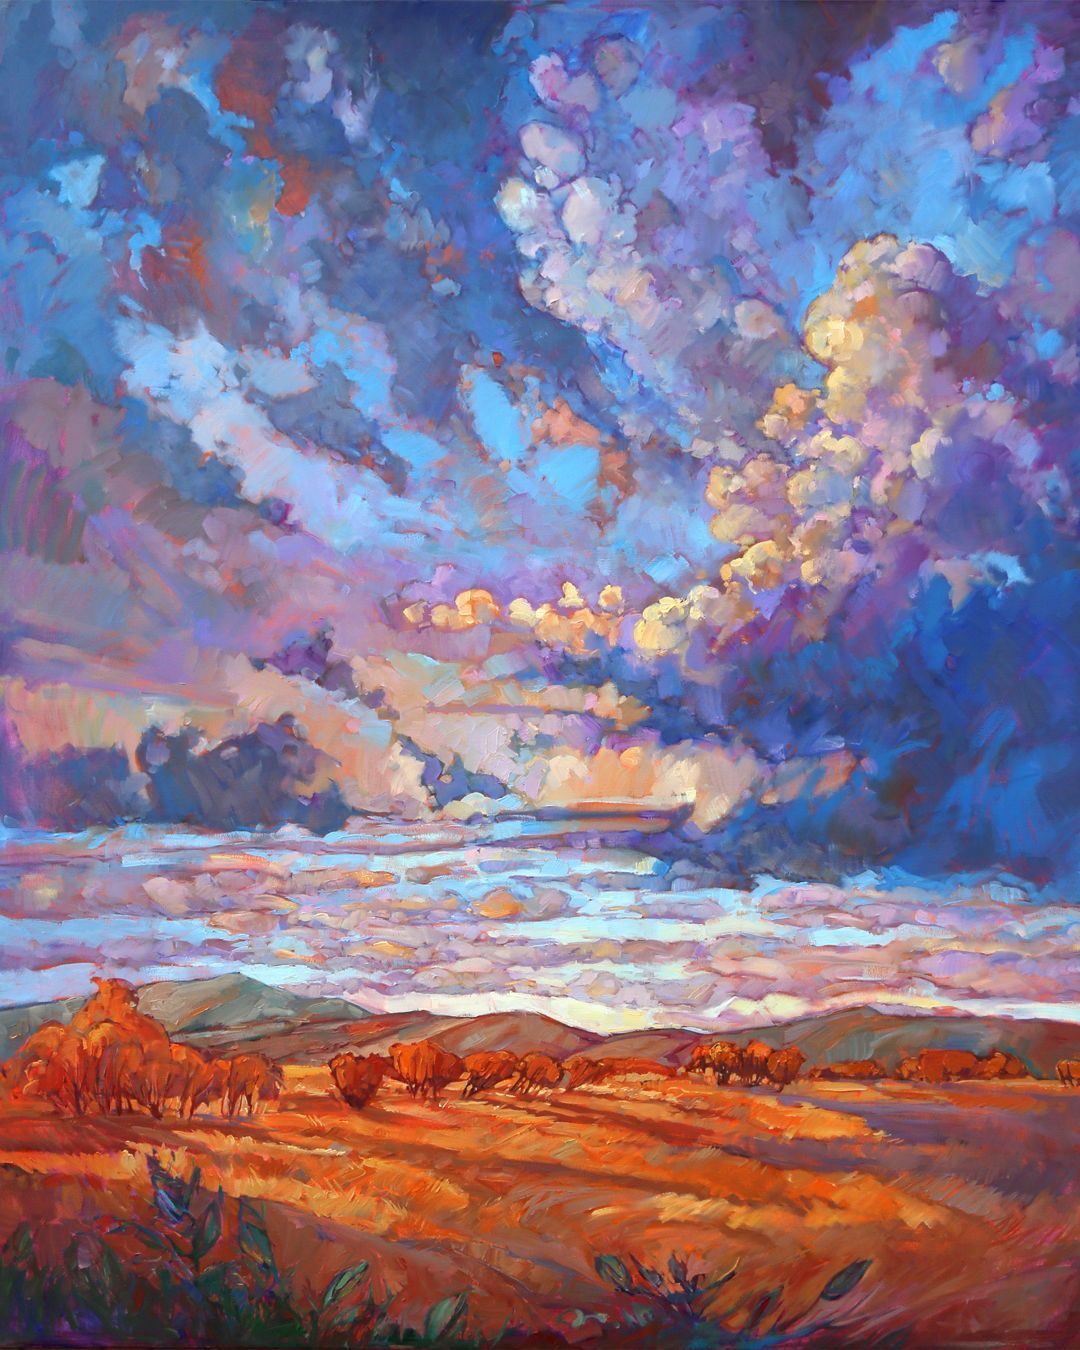 Explosions Of Colors, Vibrant Nature Paintings By Erin Hanson (1)